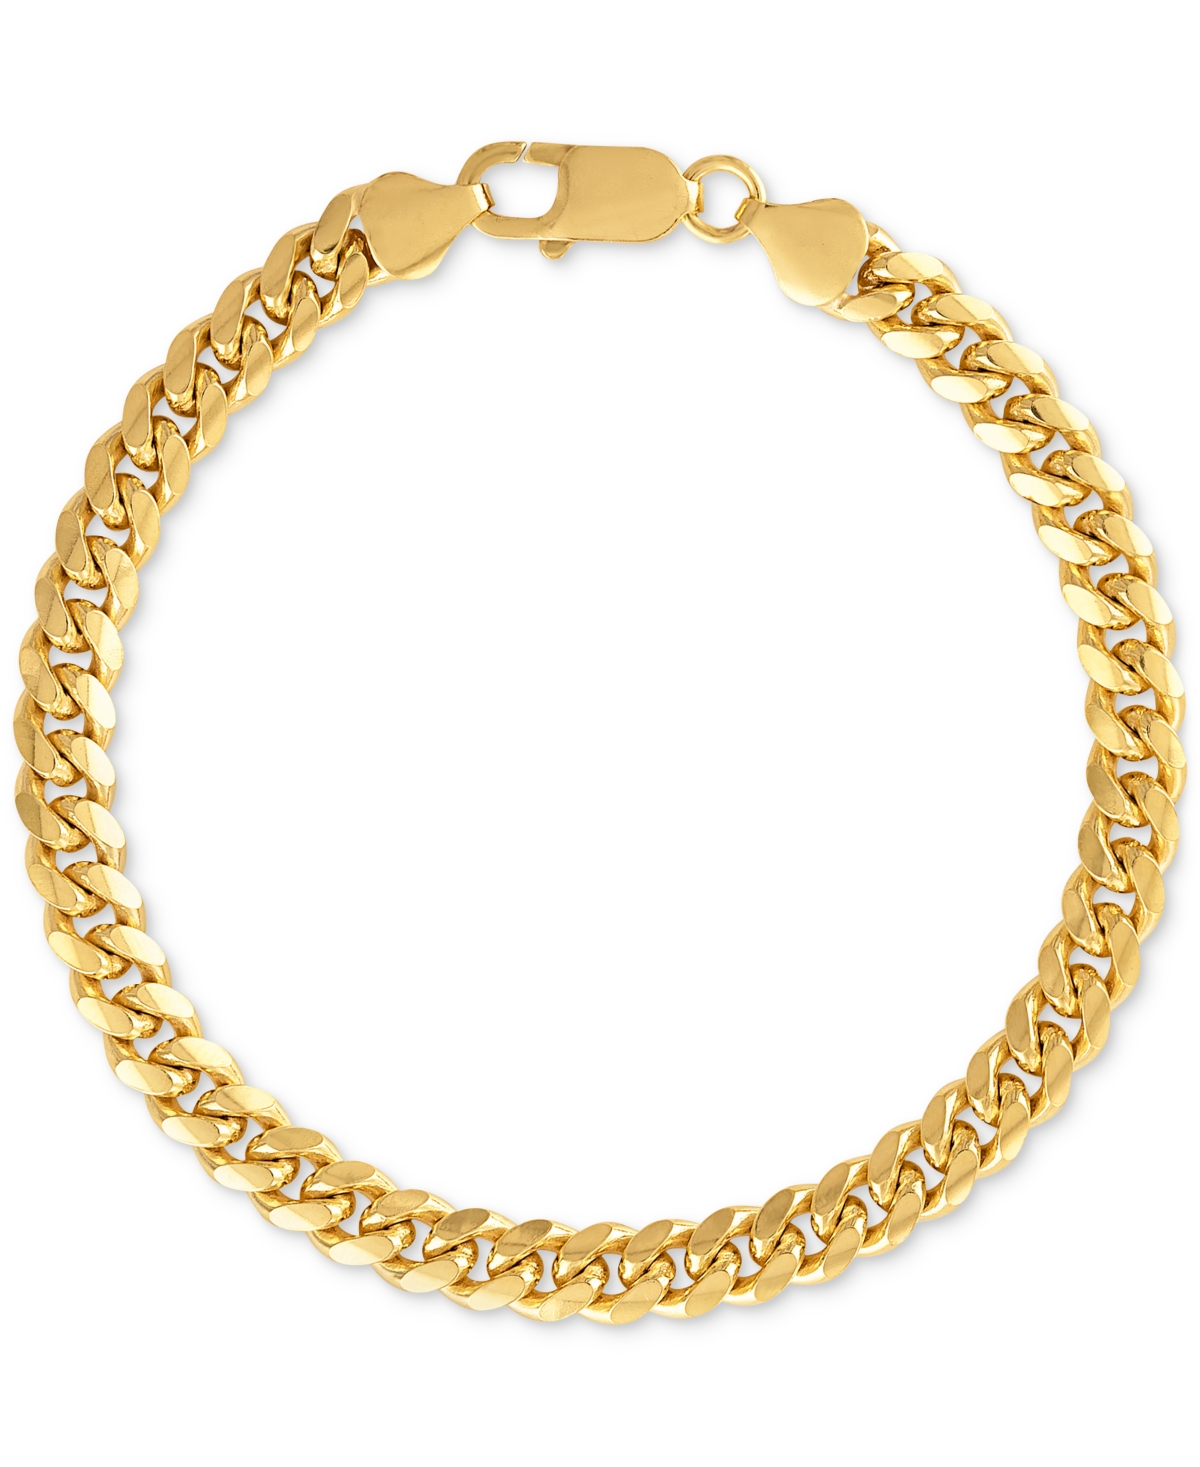 Esquire Men's Jewelry Cuban Link Chain Bracelet, Created for Macy's